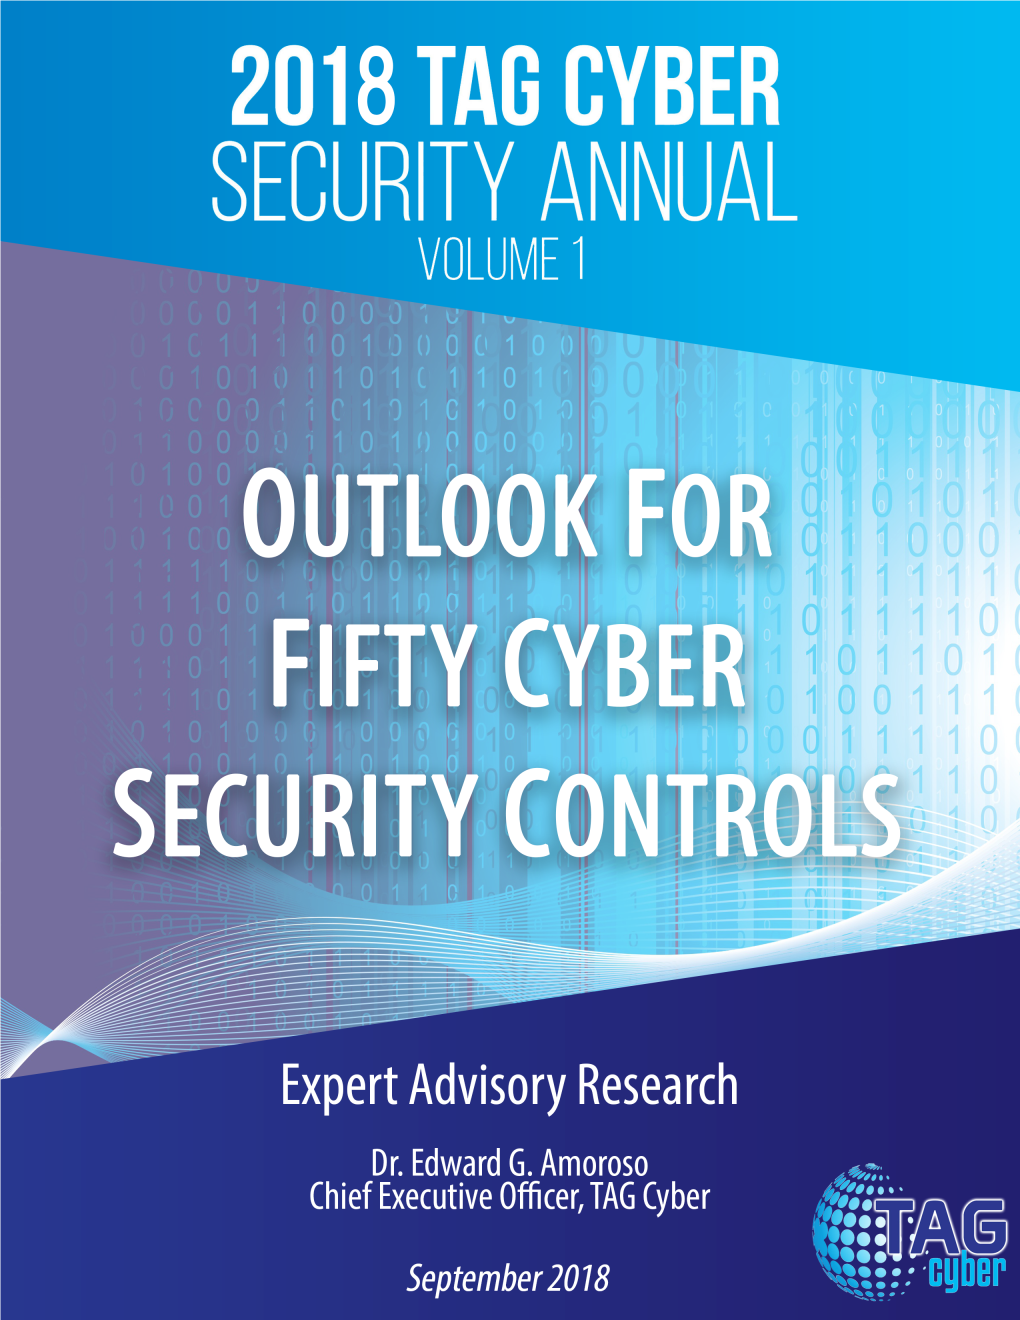 2018-TAG-Cyber-Security-Annual-Volume-1.Pdf